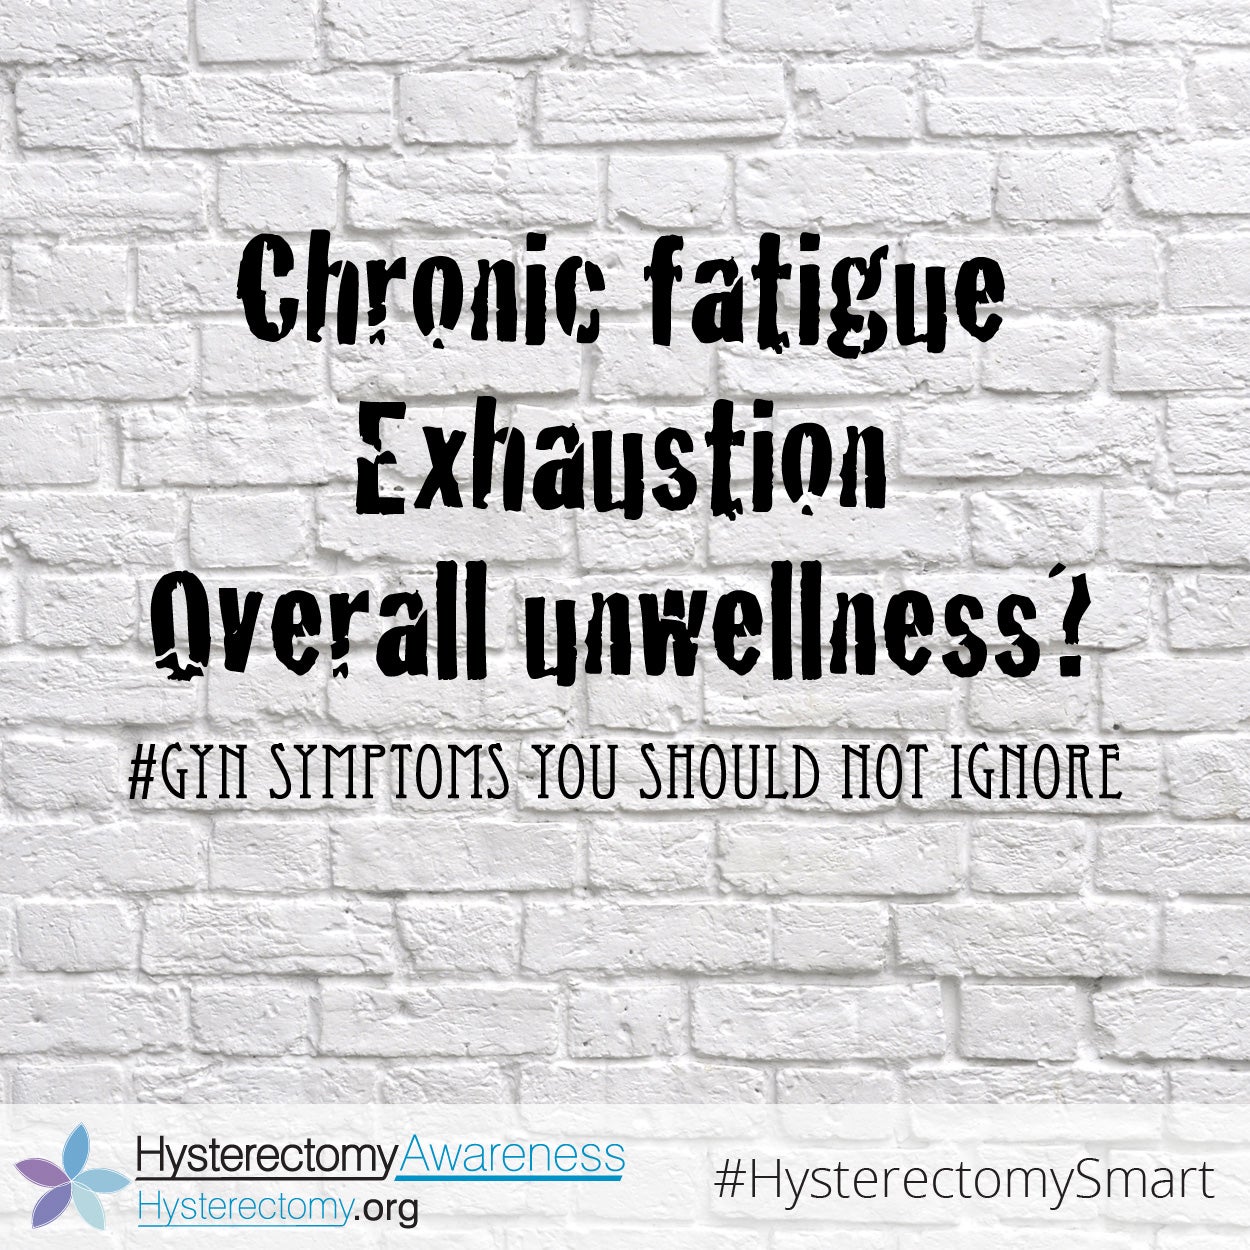 Chronic fatigue Exhaustion Overall Unwellness #GYN Symptoms #HysterectomySmart